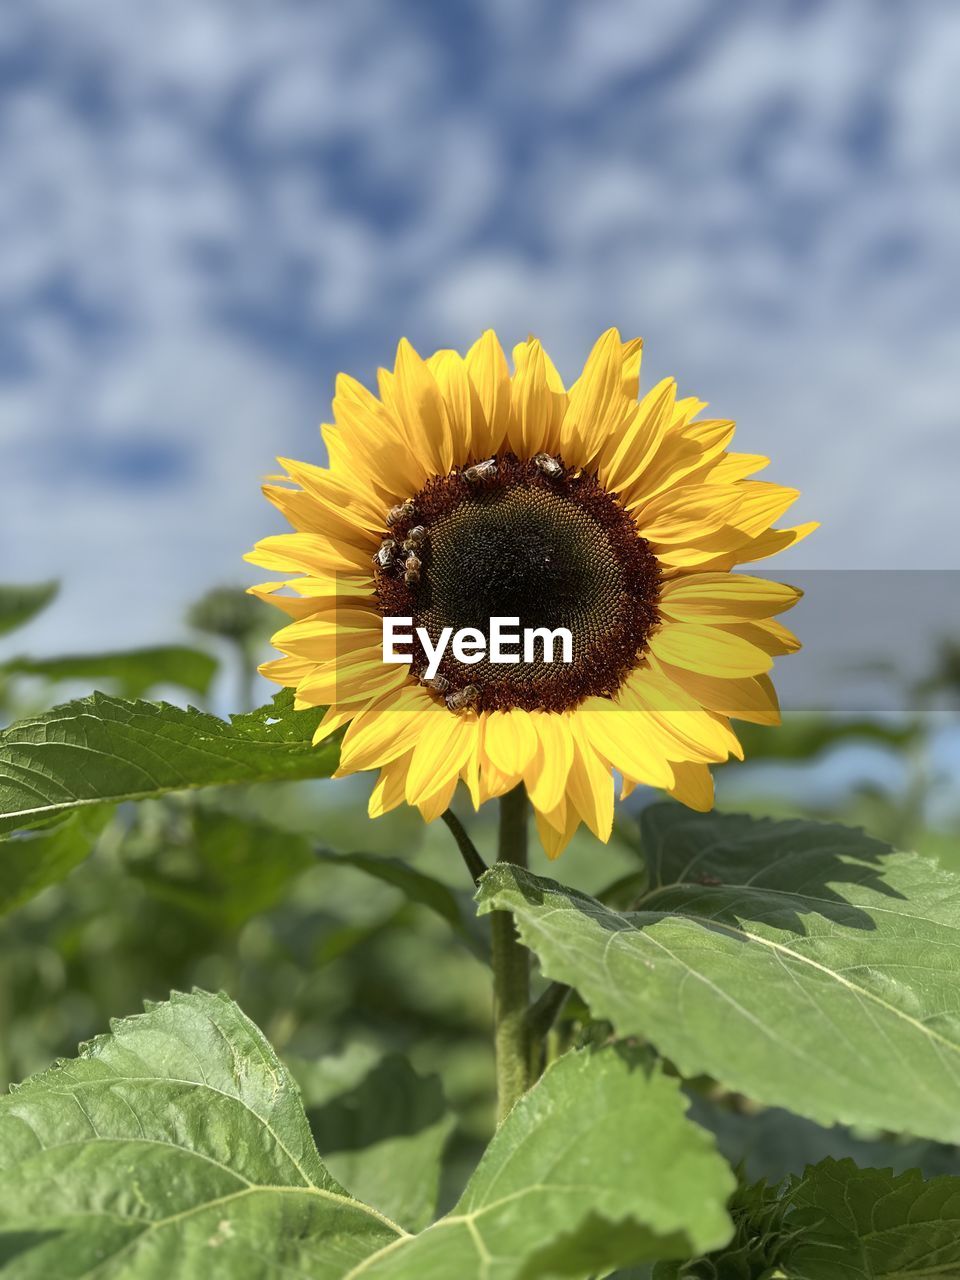 sunflower, plant, flower, flowering plant, freshness, flower head, beauty in nature, growth, nature, yellow, field, plant part, leaf, inflorescence, petal, close-up, fragility, sky, sunflower seed, no people, landscape, rural scene, pollen, cloud, focus on foreground, agriculture, summer, outdoors, land, springtime, green, day, environment, botany, blossom